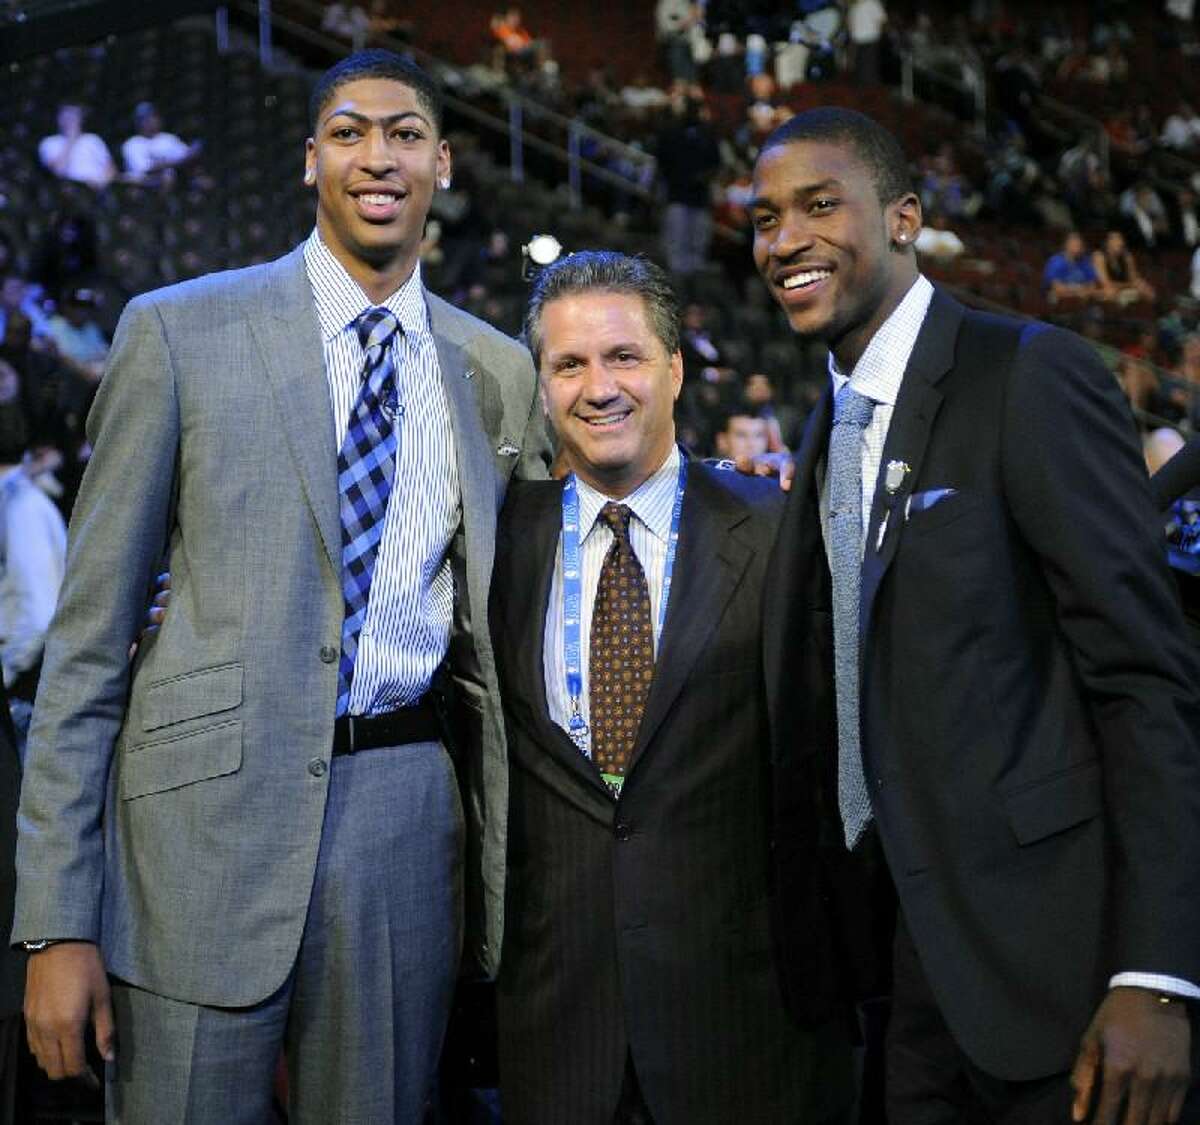 ASSOCIATED PRESS Kentucky head coach John Calipari, center, stands with former players Anthony Davis, left, and Michael Kidd-Gilchrist, right, before the NBA Draft on Thursday night at the Prudential Center in Newark, N.J. Davis was selected the No. 1 overall pick by the New Orleans Hornets, and Kidd-Gilchrist was selected No. 2 by the Charlotte Bobcats.